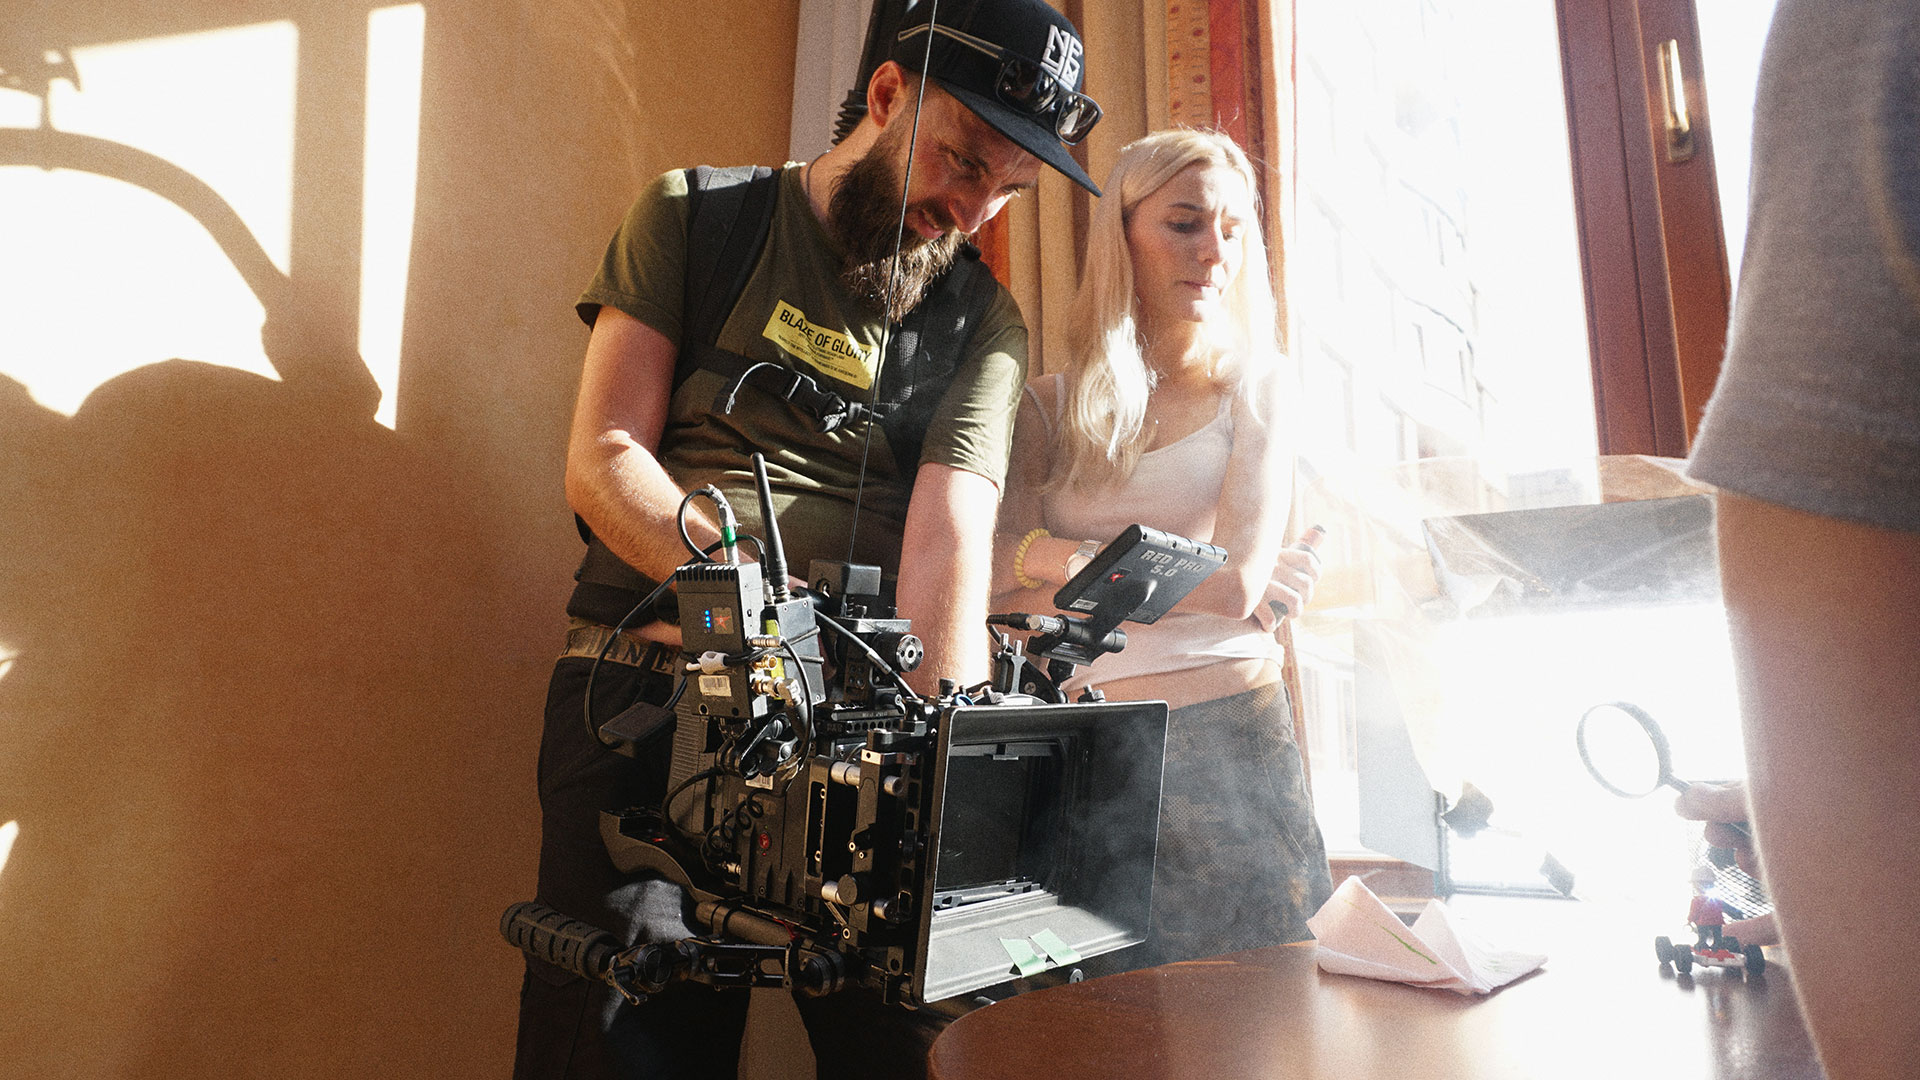 Videographer Yuri is capturing the moment the toy plane catches fire while our artist, Vika Yanchuk, creates smoke using a vape. The smoke is necessary so that the light beam from the magnifying glass can be seen in the video.